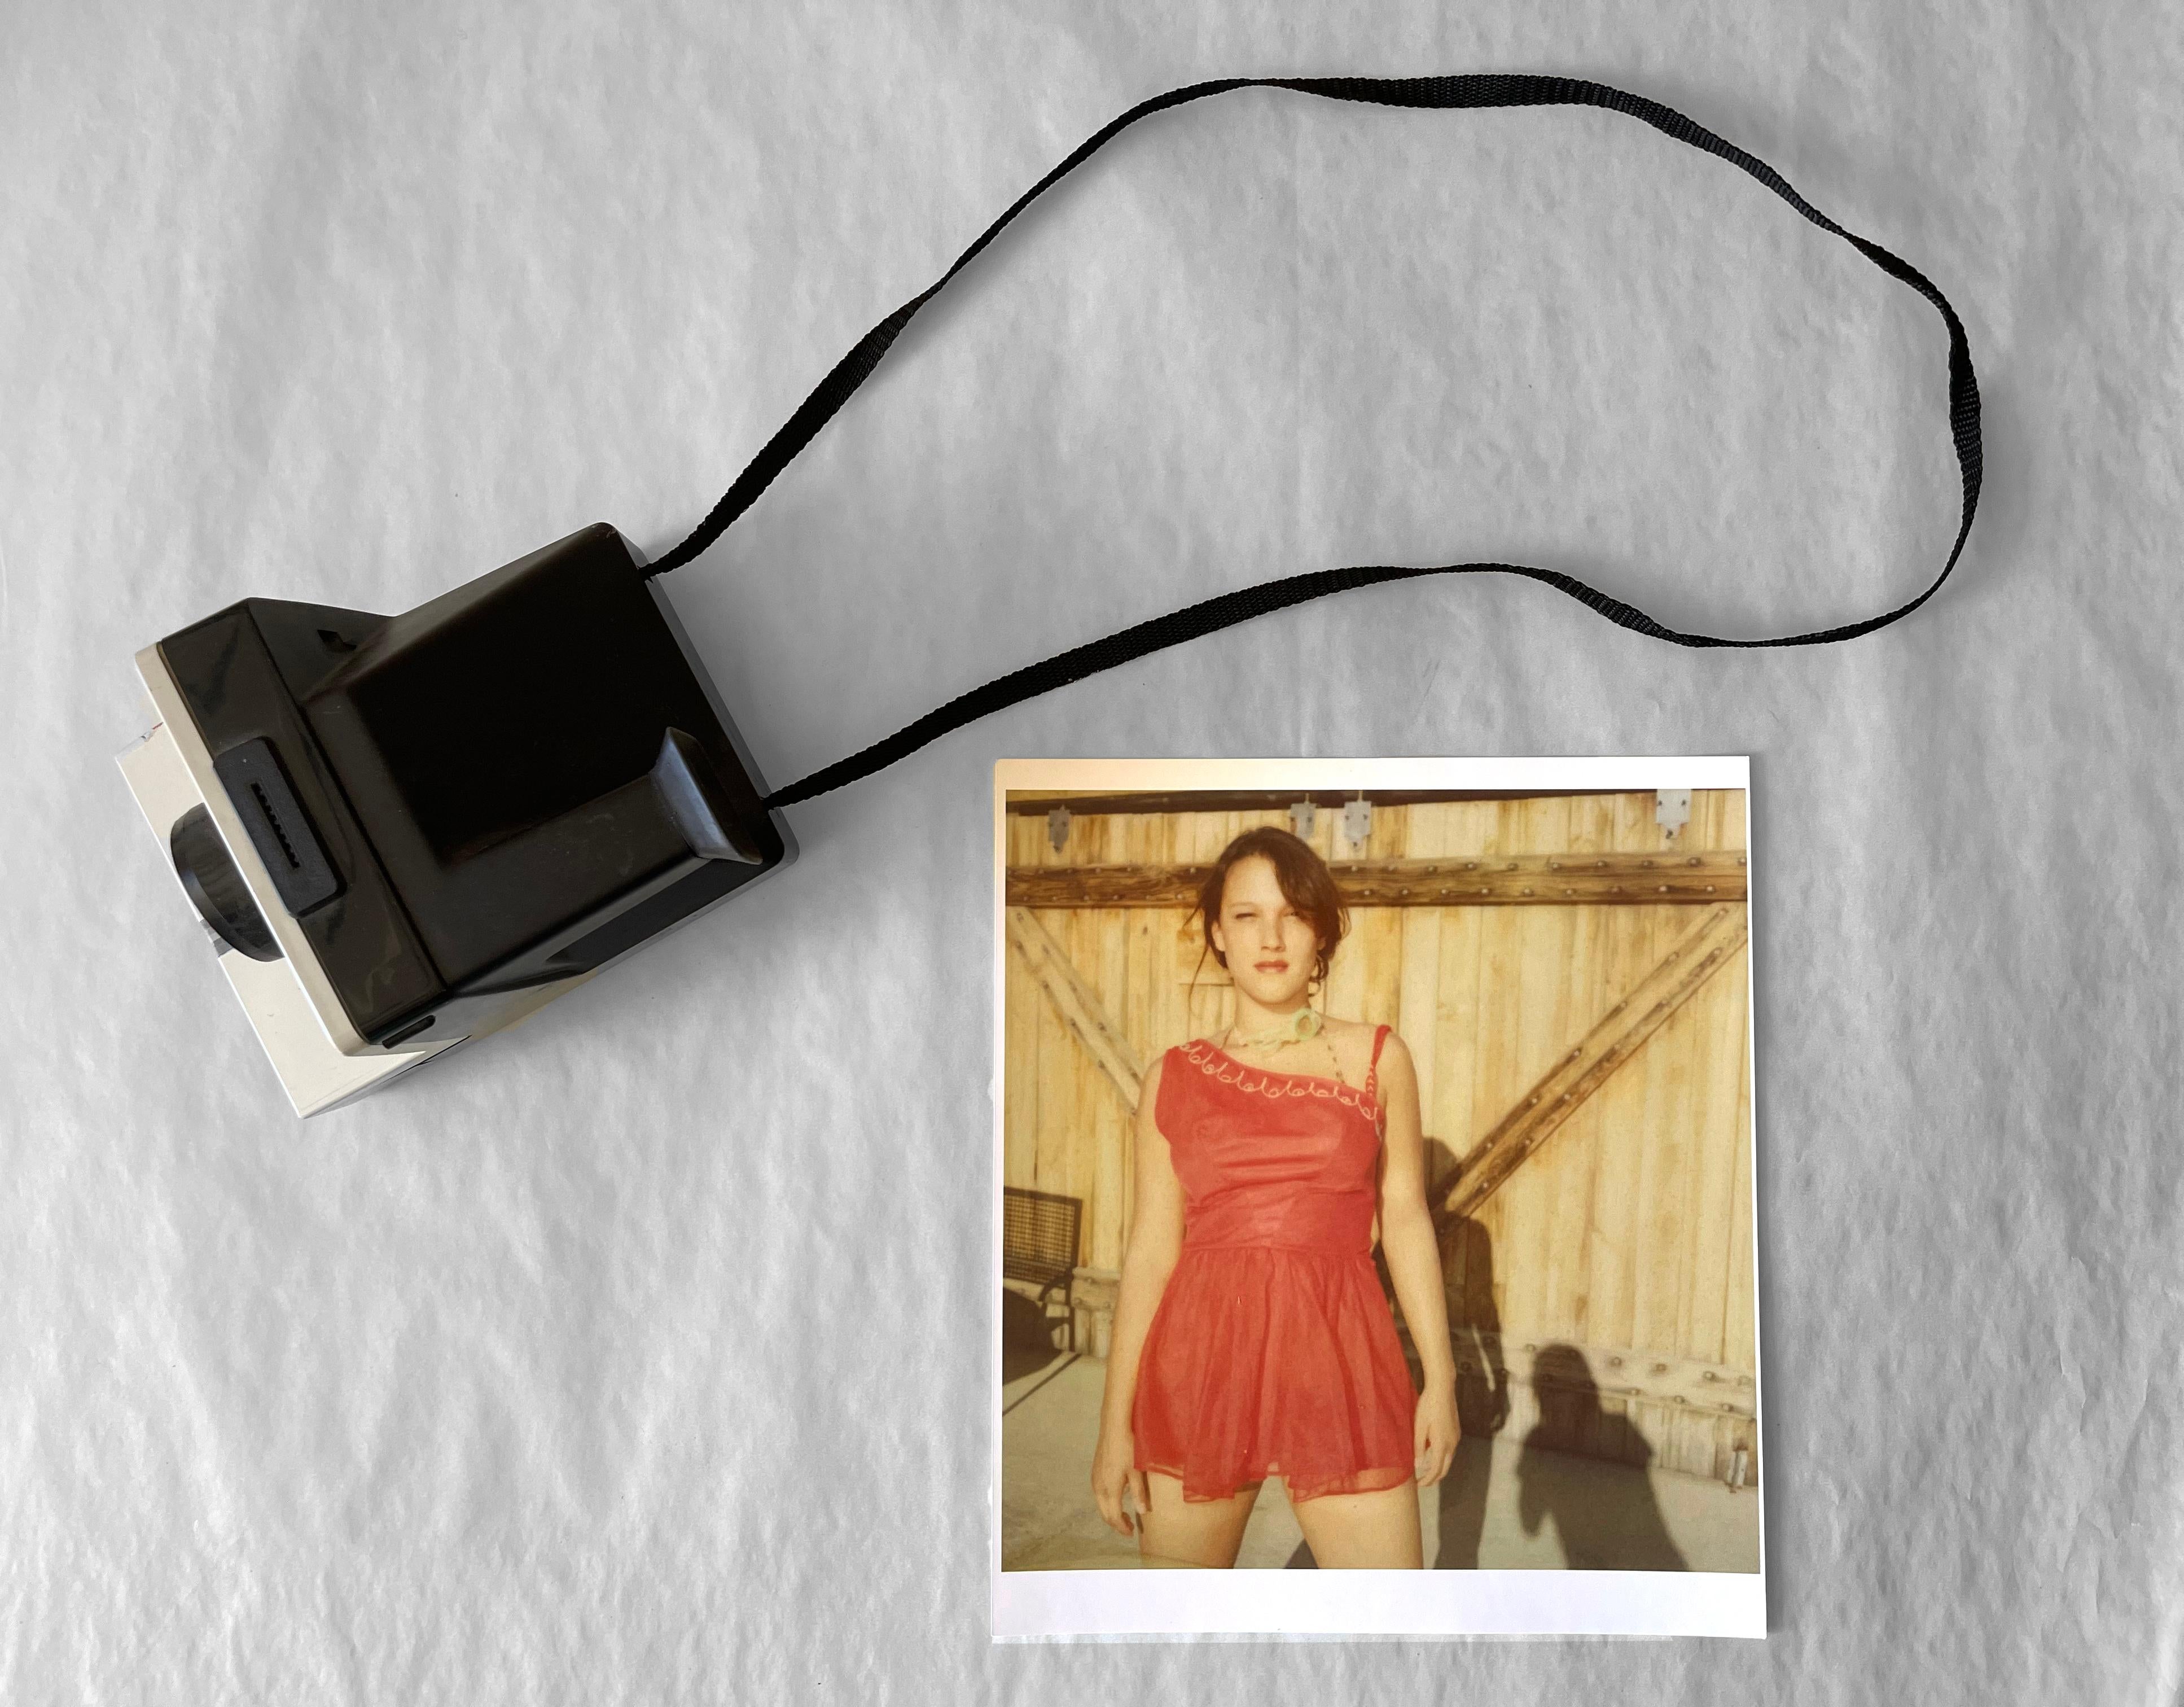 Lalala (Till Death do us Part) including SX-70 Polaroid camera signed - Photograph by Stefanie Schneider